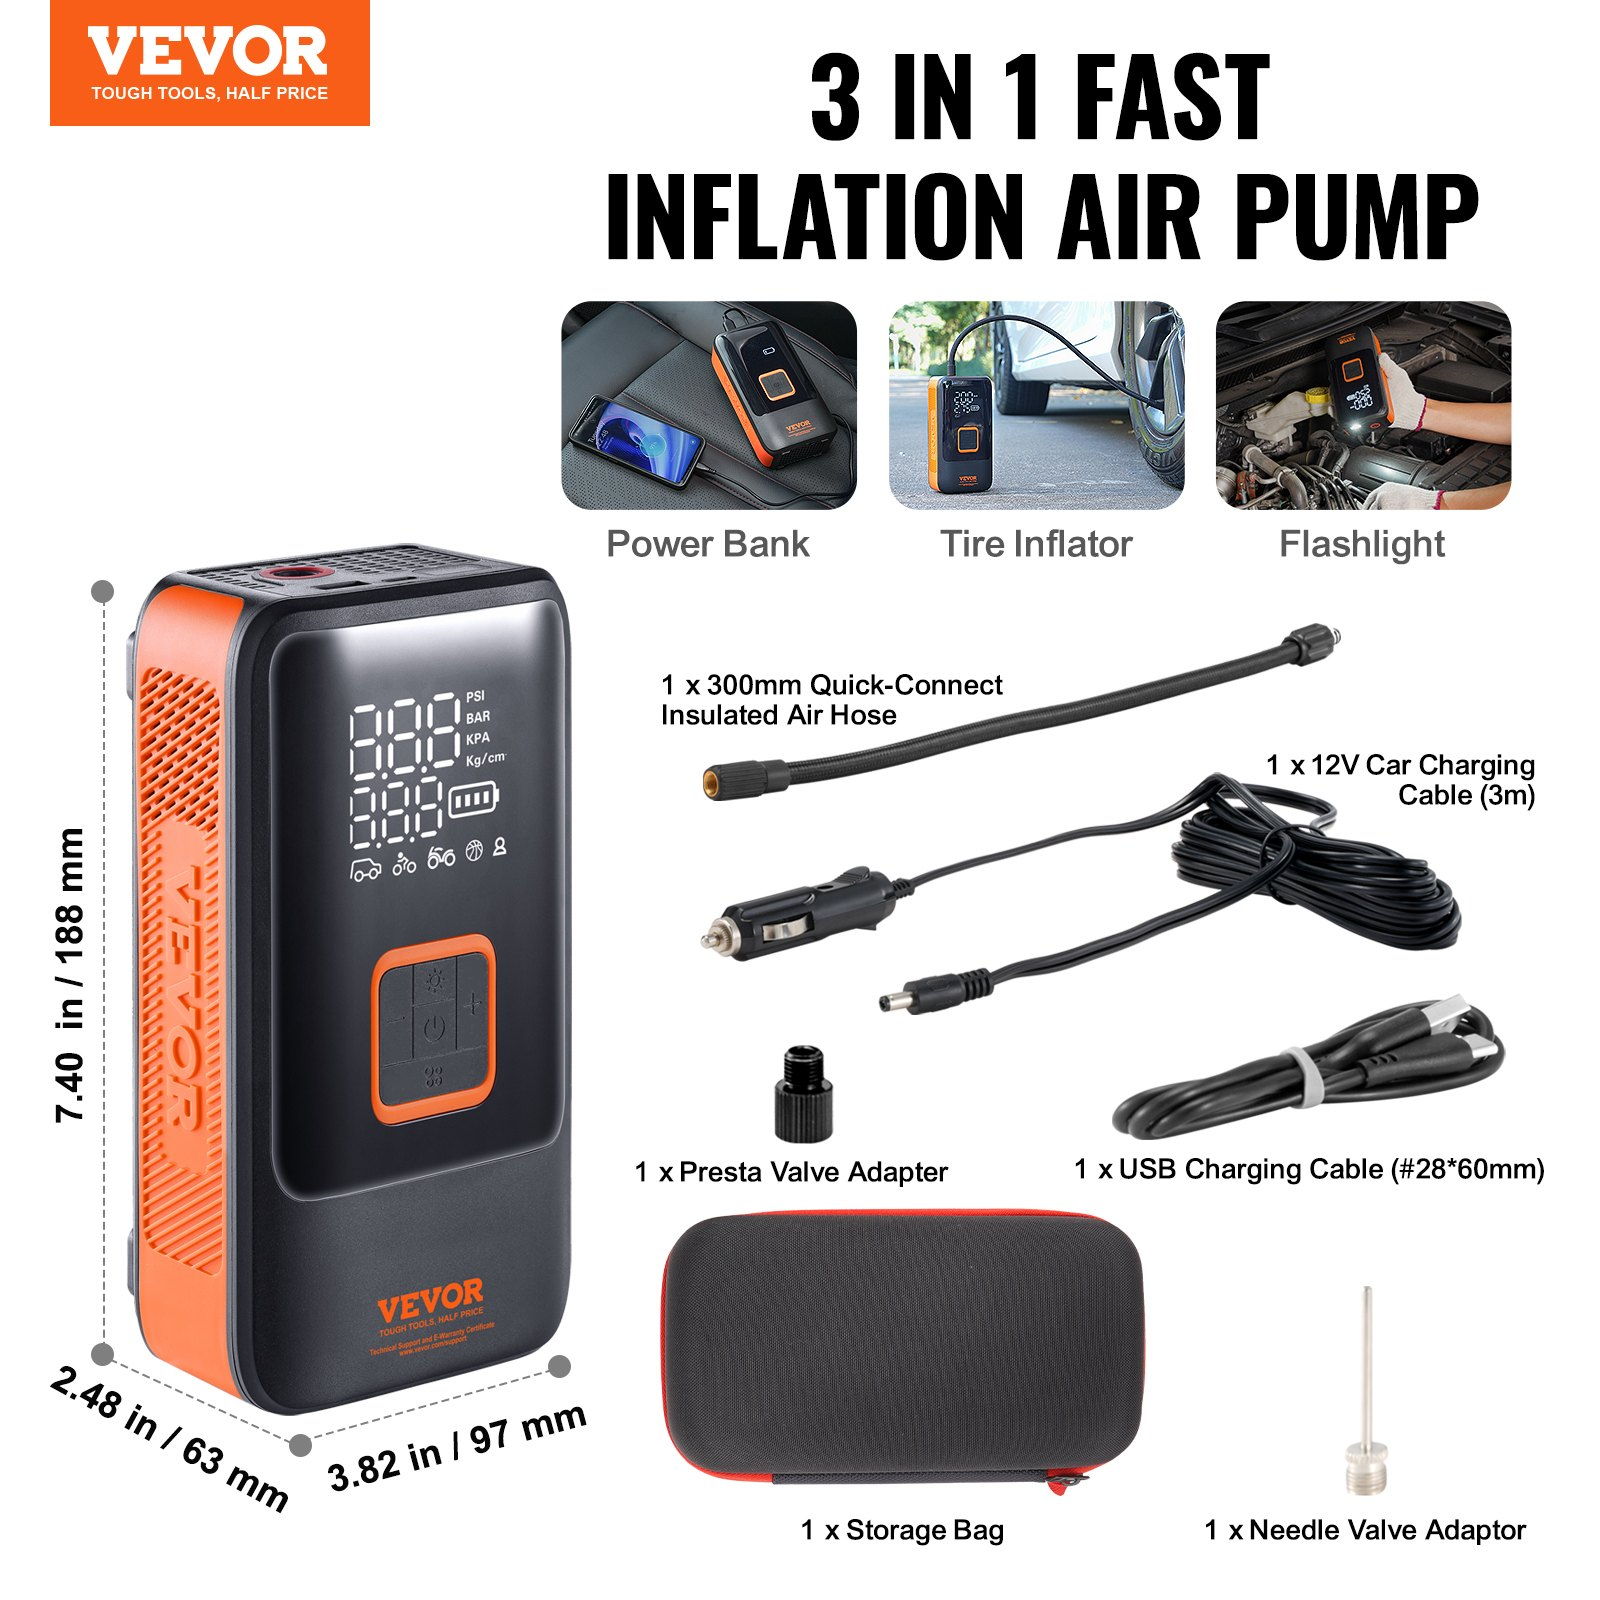 VEVOR Tire Inflator Portable Air Compressor, 30s Fast Inflation Dual-Cylinder Air Pump, 12000 mAh Cordless Air Compressor with LCD Screen, Auto Shut-Off, Suitable for SUV, MPV, Cars, Motorcycles, Goodies N Stuff